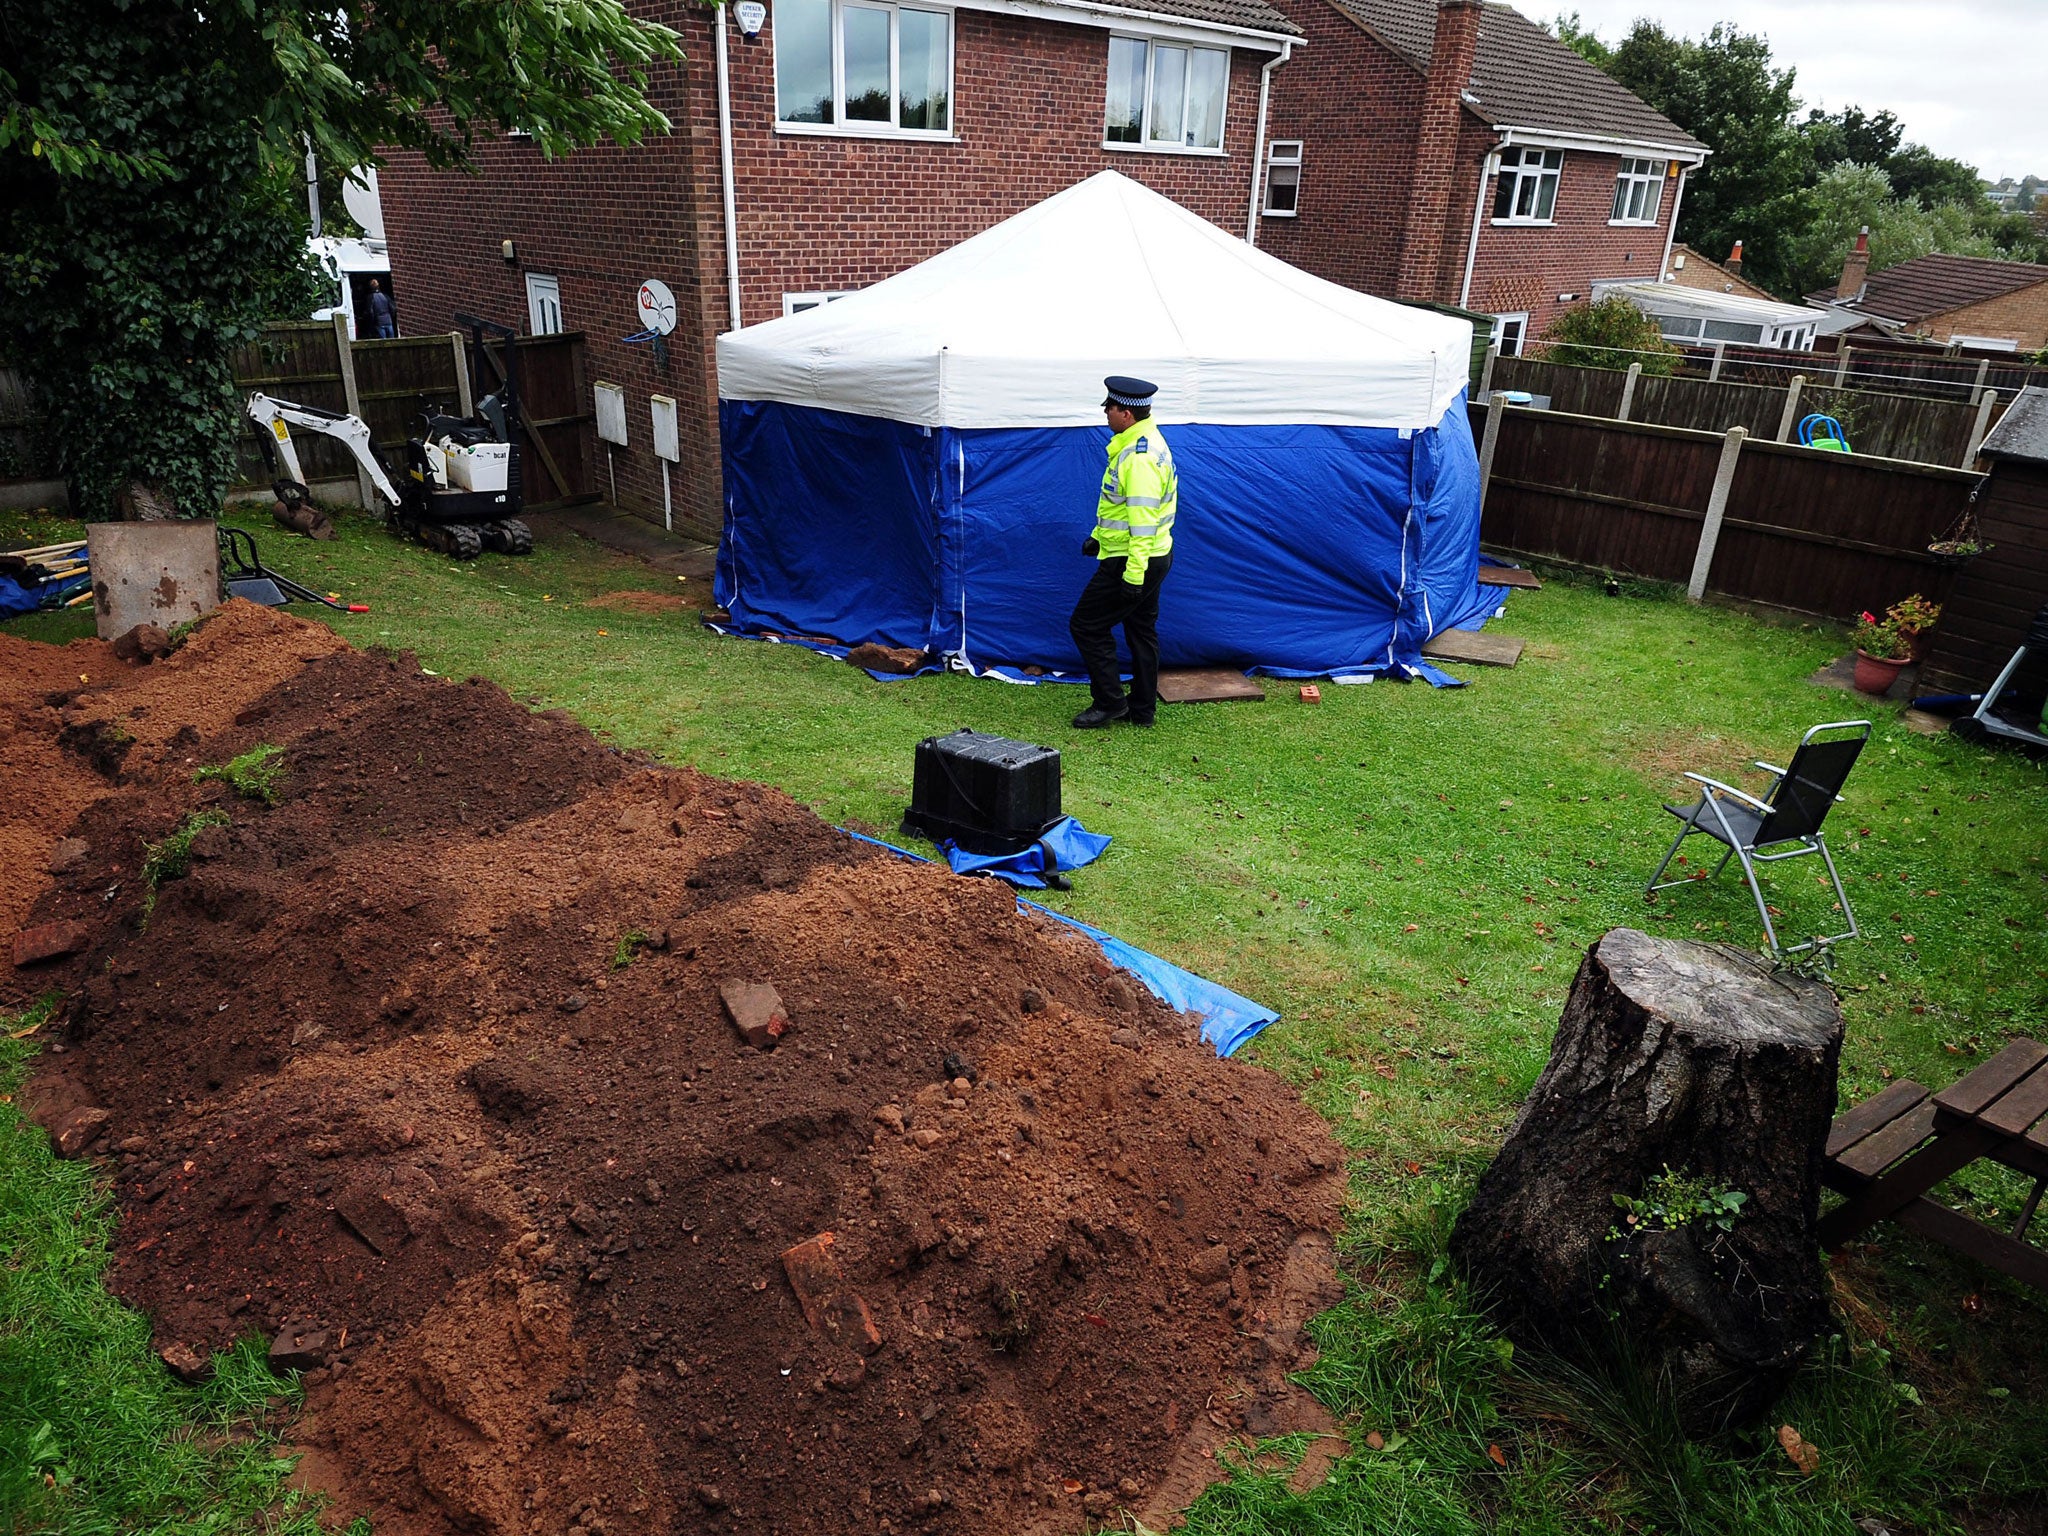 Police in the garden of a house in Blenheim Close, Forest Town, near Mansfield, where the remains of William and Patricia Wycherley discovered, as their daughter Susan Edwards, 55, and her husband Christopher, 57, ave admitted burying her parents in the b